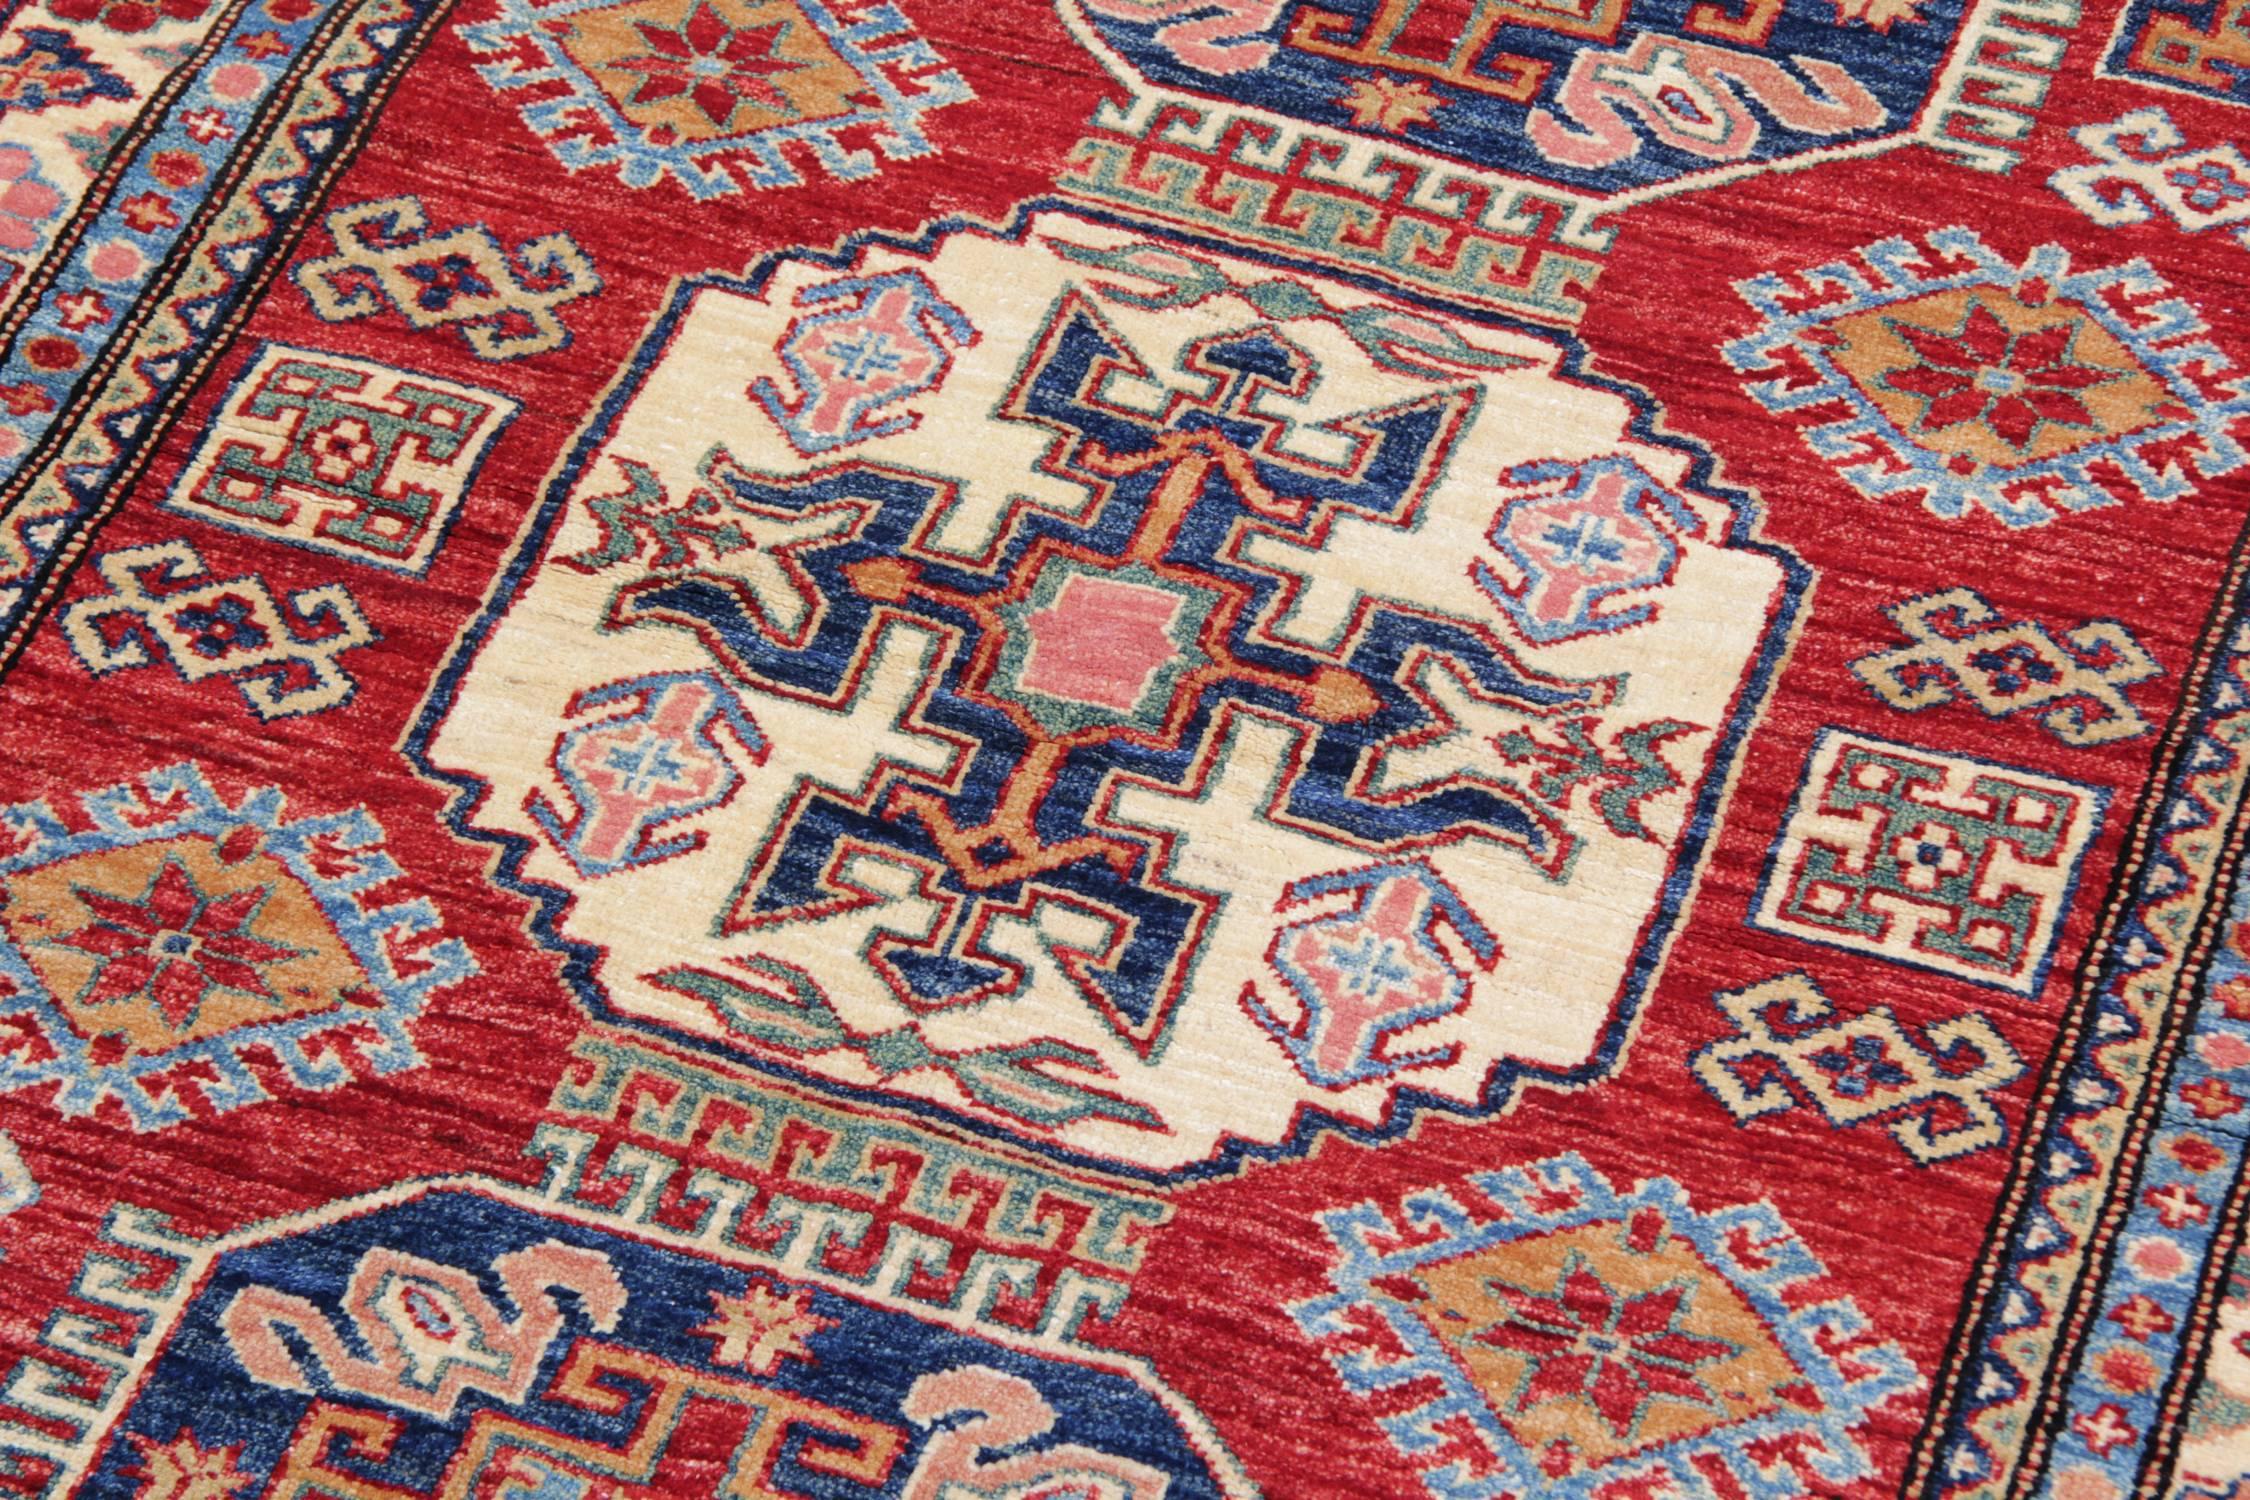 These new traditional handmade rugs are featuring designs from the Kazak region. A traditional tribal rug is famous in the region of Kazak Area. This handwoven rug has been made by Afghan weavers of top quality wool and cotton. This carpet rug